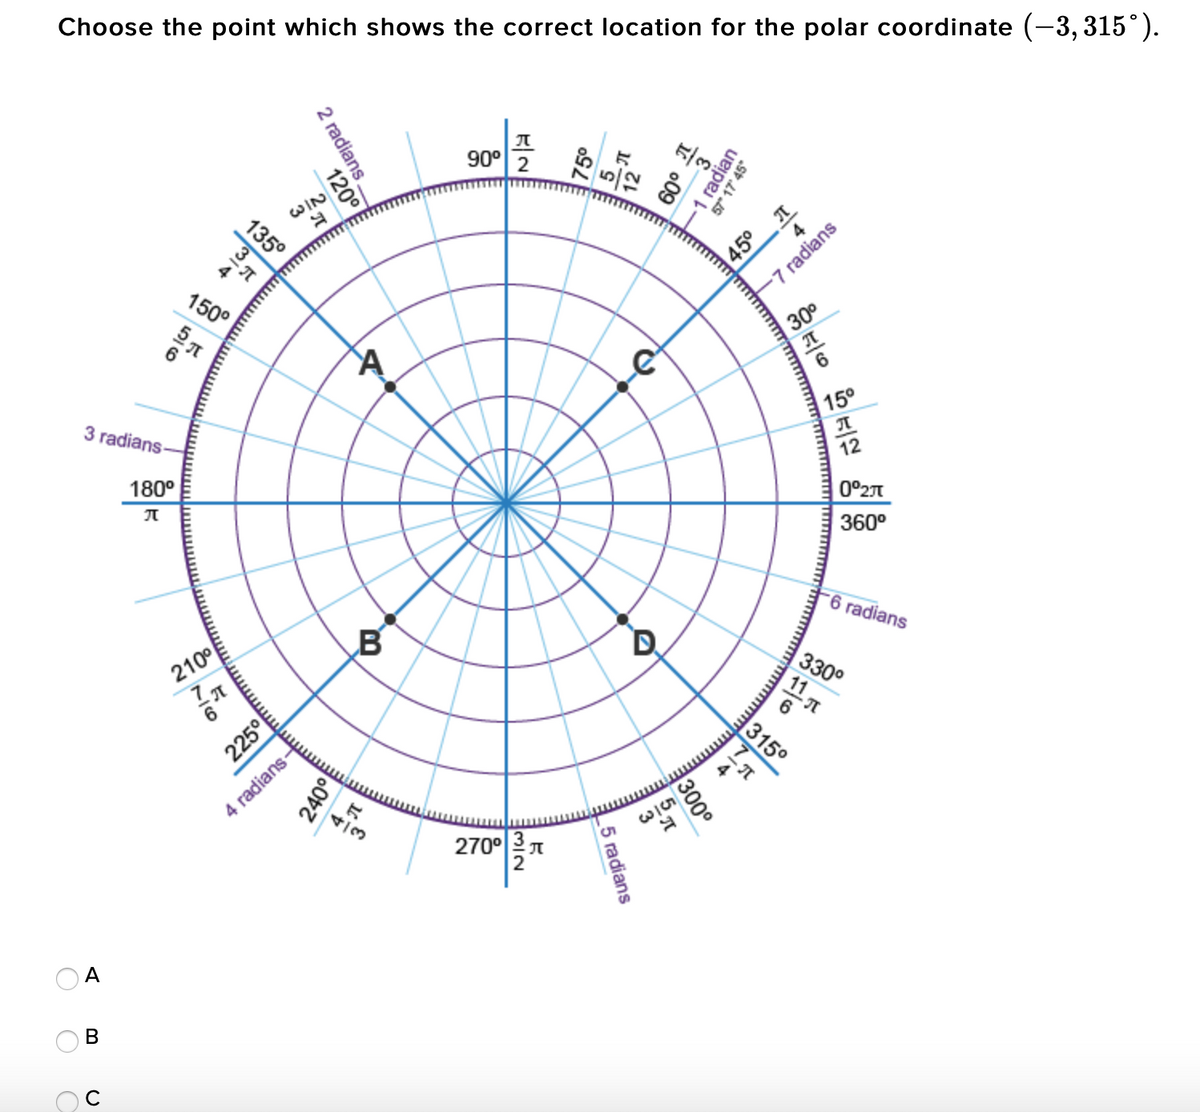 Choose the point which shows the correct location for the polar coordinate (-3, 315°).
90°
2
135°
WIN
45° T
-7 radians
150°
30°
3 radians-
15°
180°
12
0°27
360°
-6 radians
210°
315°
4 radians-
4/3
W/53
270° 3 7
В
radian
57" 17' 45°
2 radians.
o09
-1
120°
300
7/6
5 radians
225°
240°
